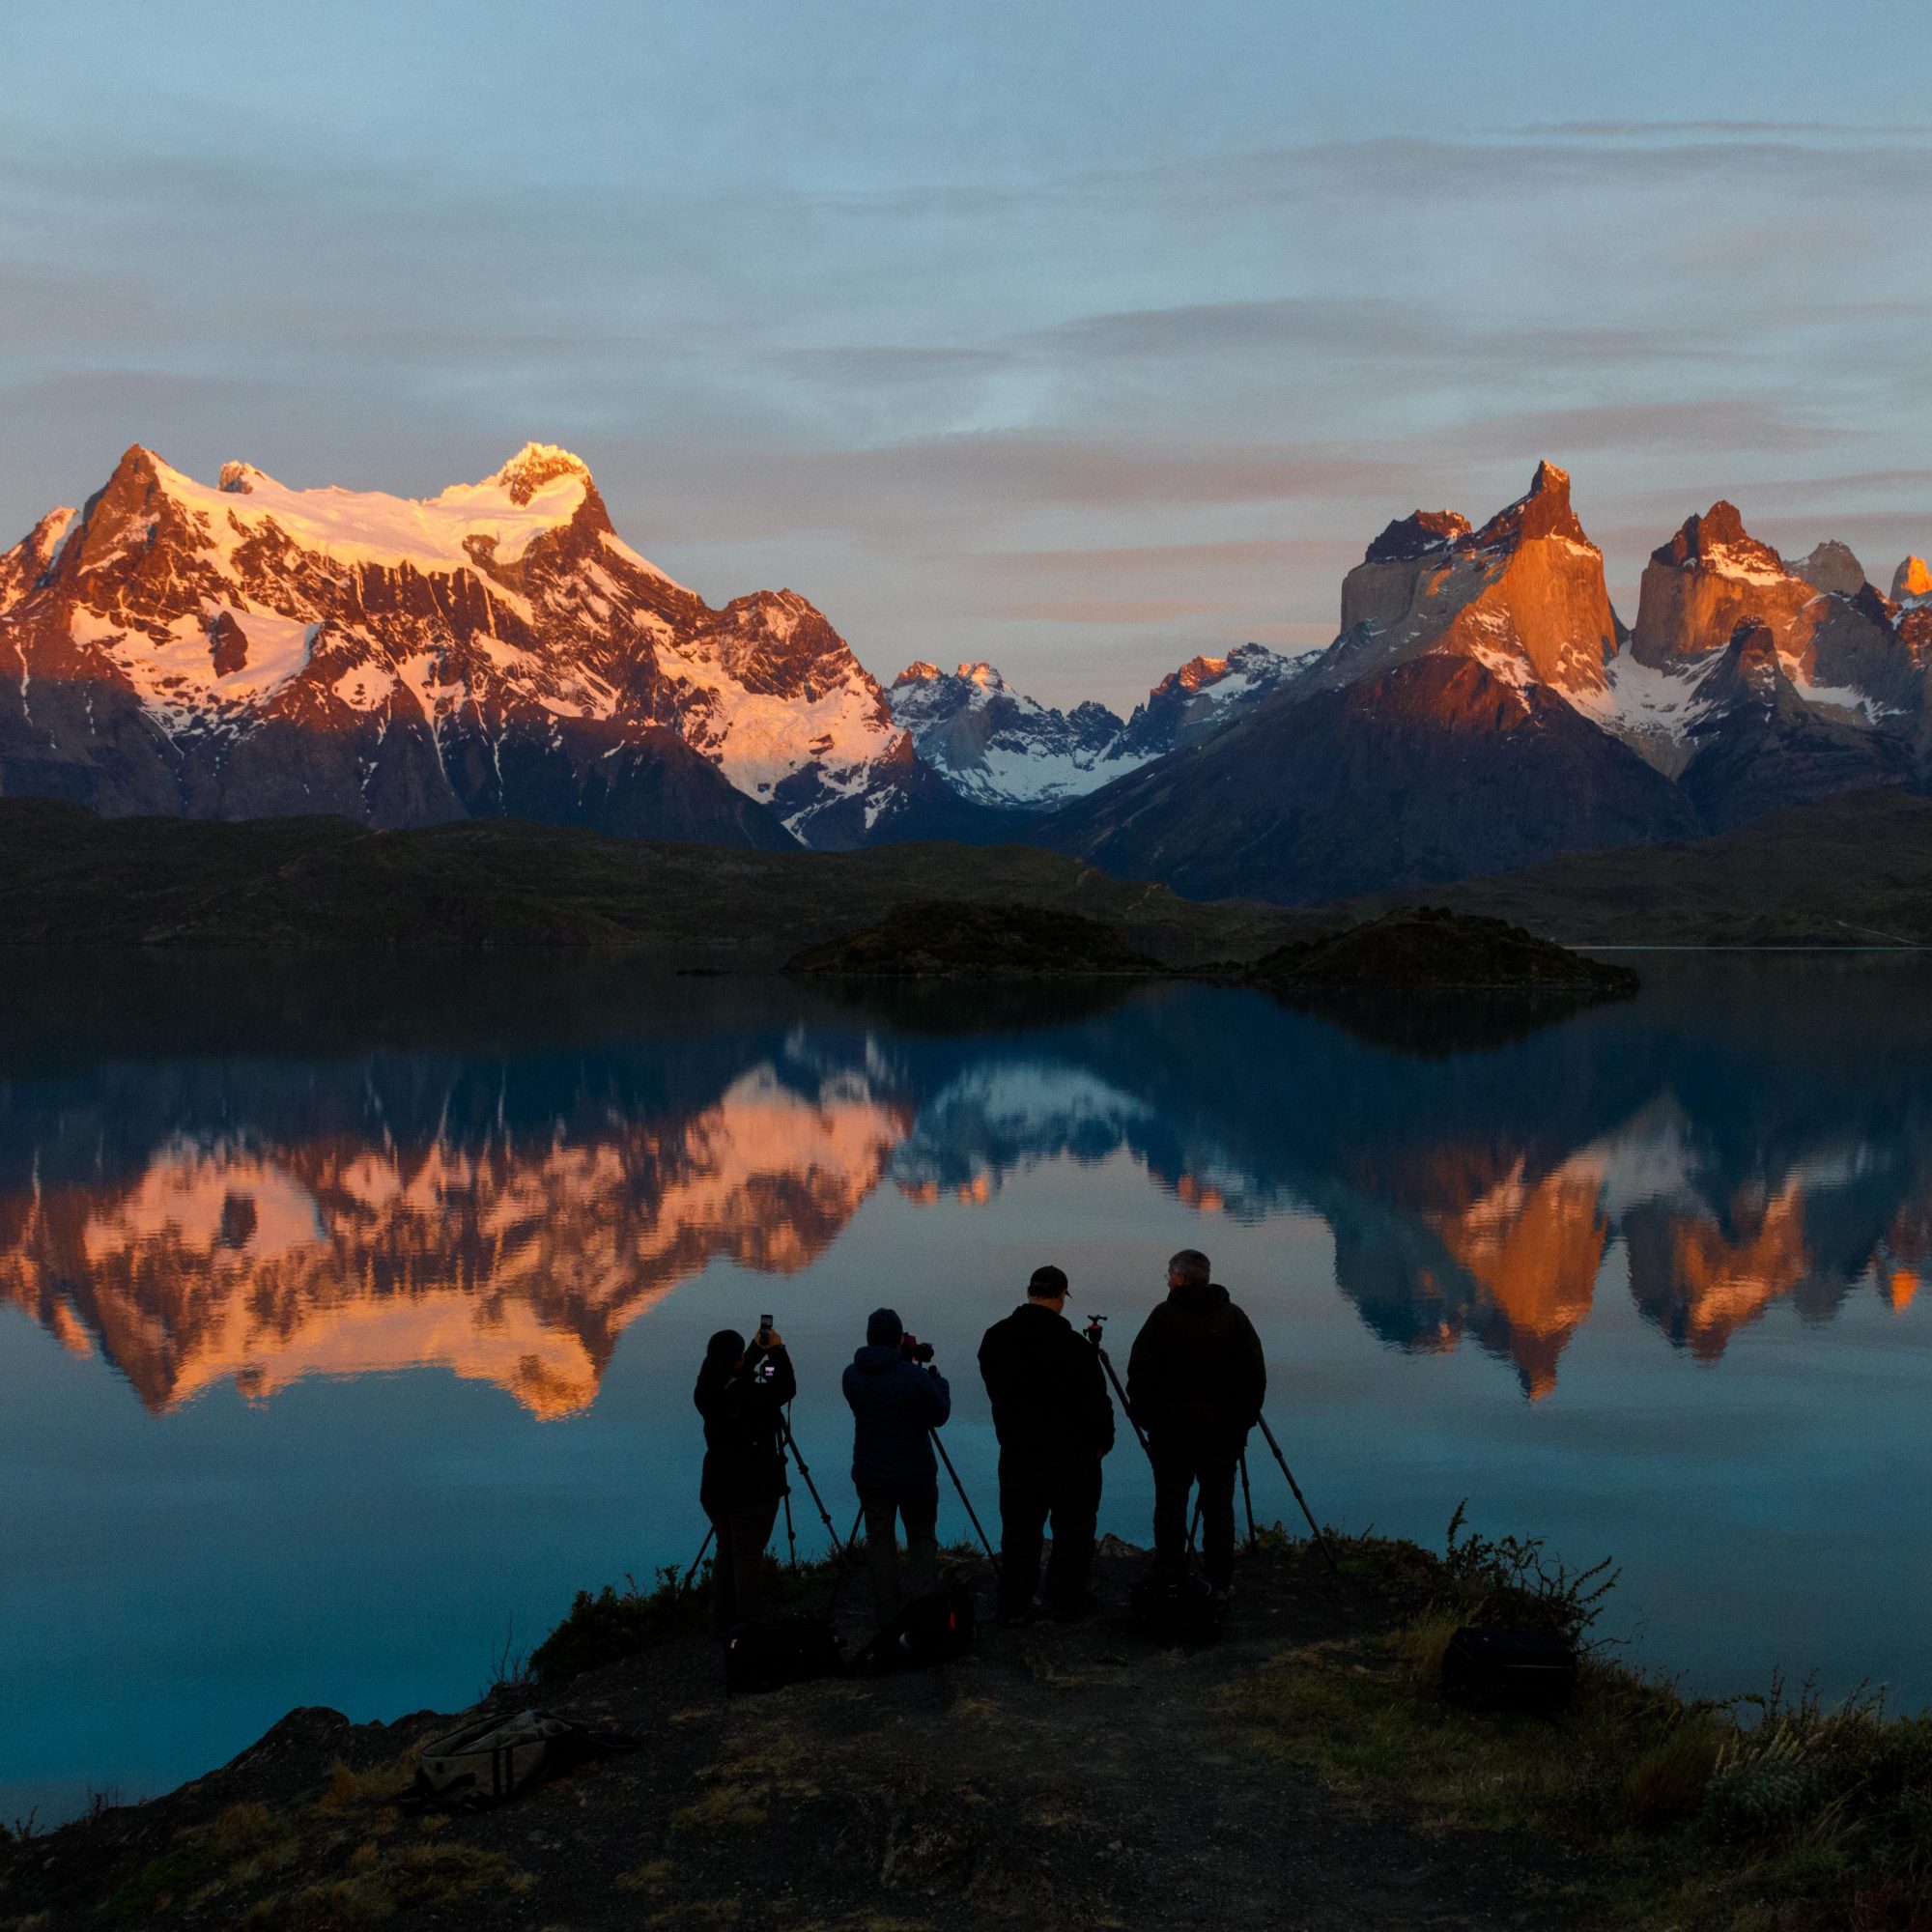 Sunrise over Torres del Paine from Lago Grey – Chile 2018